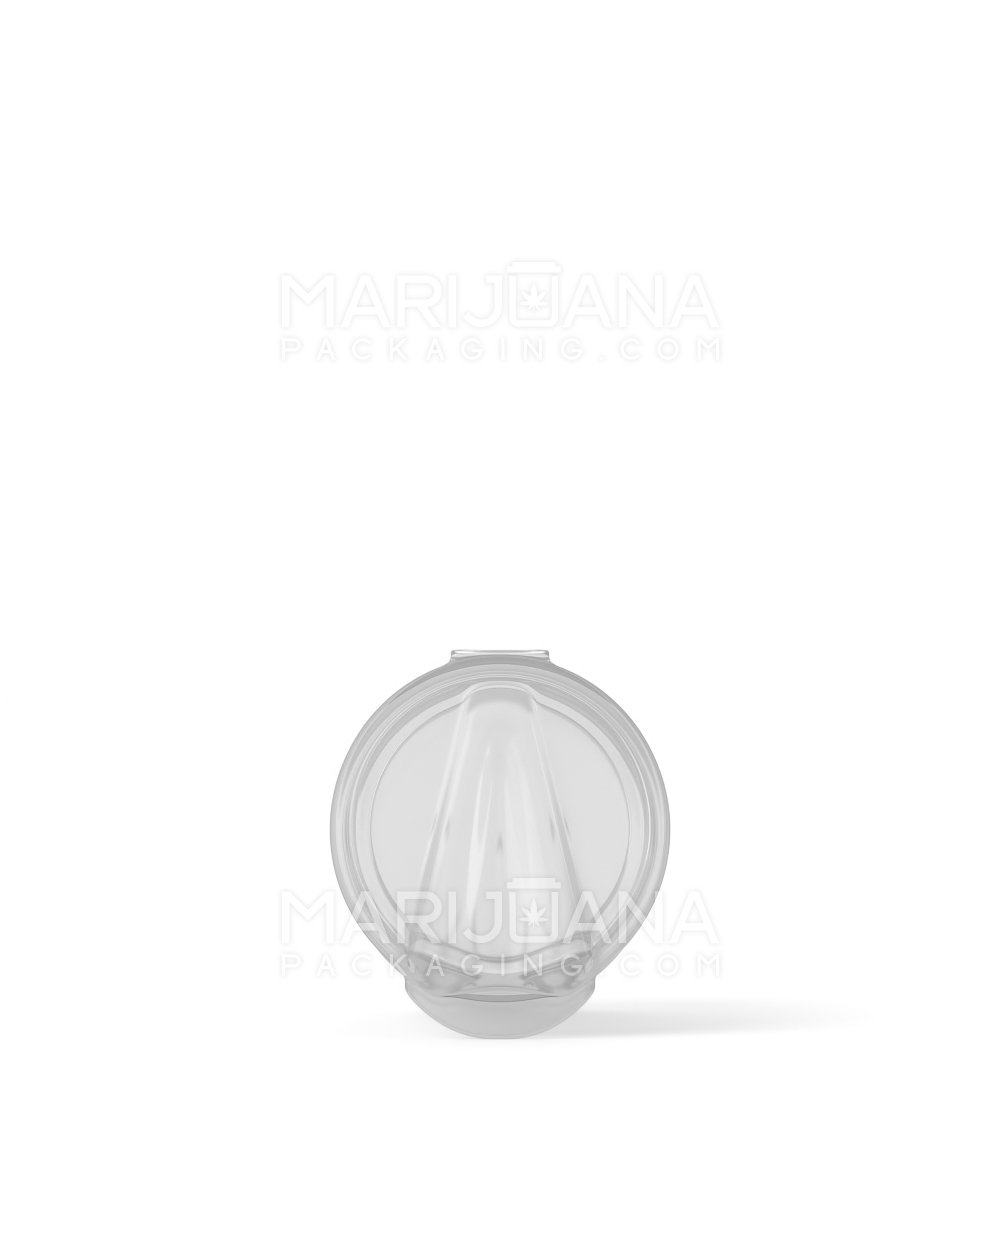 Pop Top Concentrate Containers | 5mL - Clear - 100 Count - 4